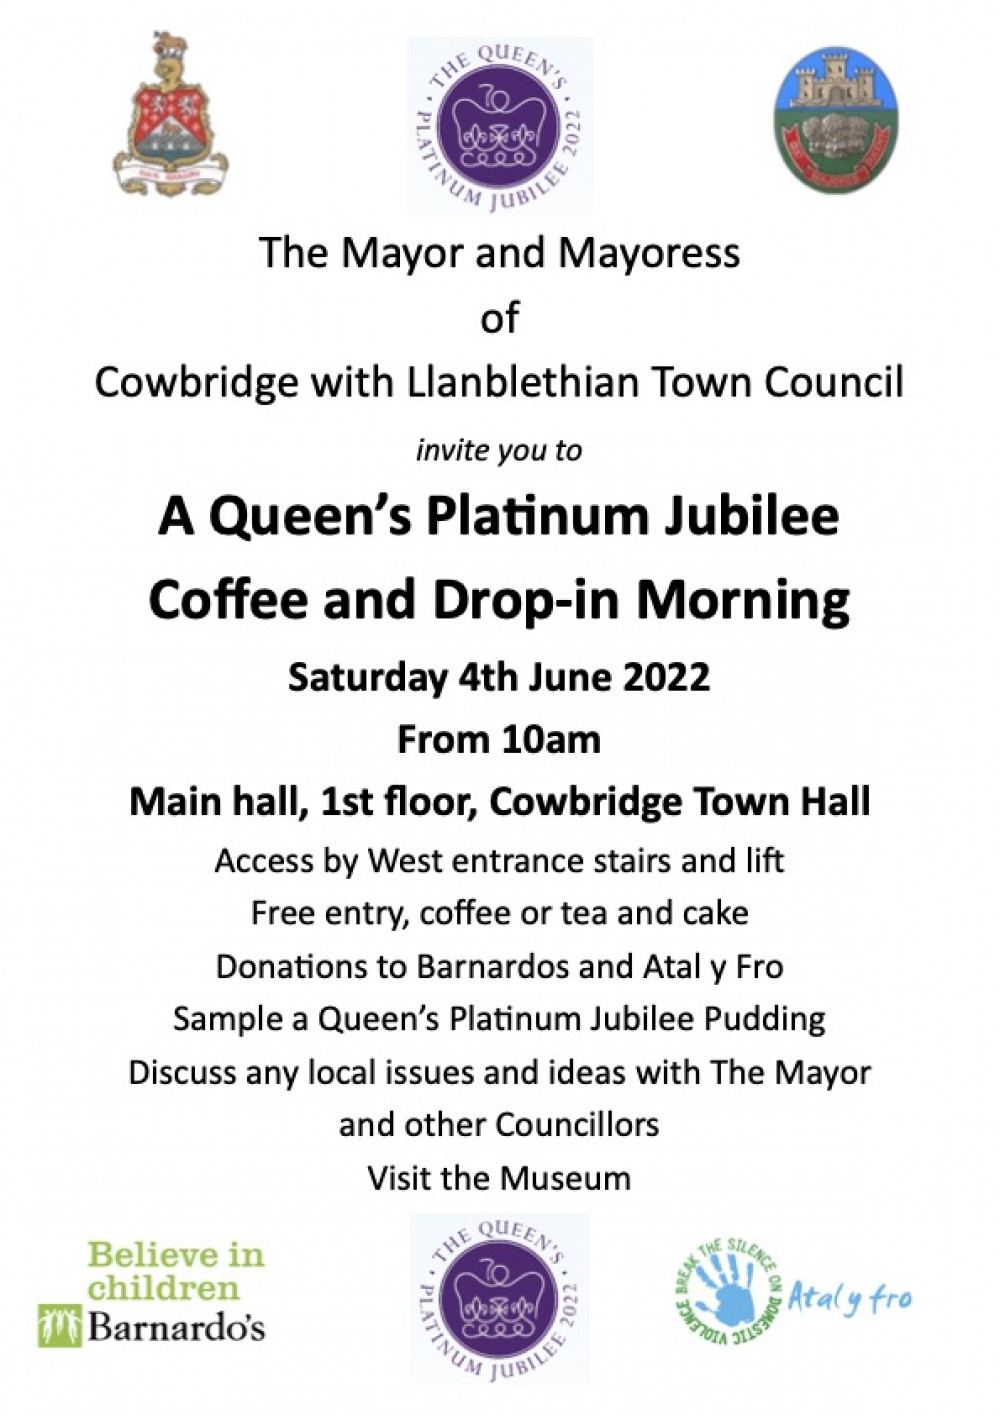 A Queen’s Platinum Jubilee Coffee and Drop-in Morning